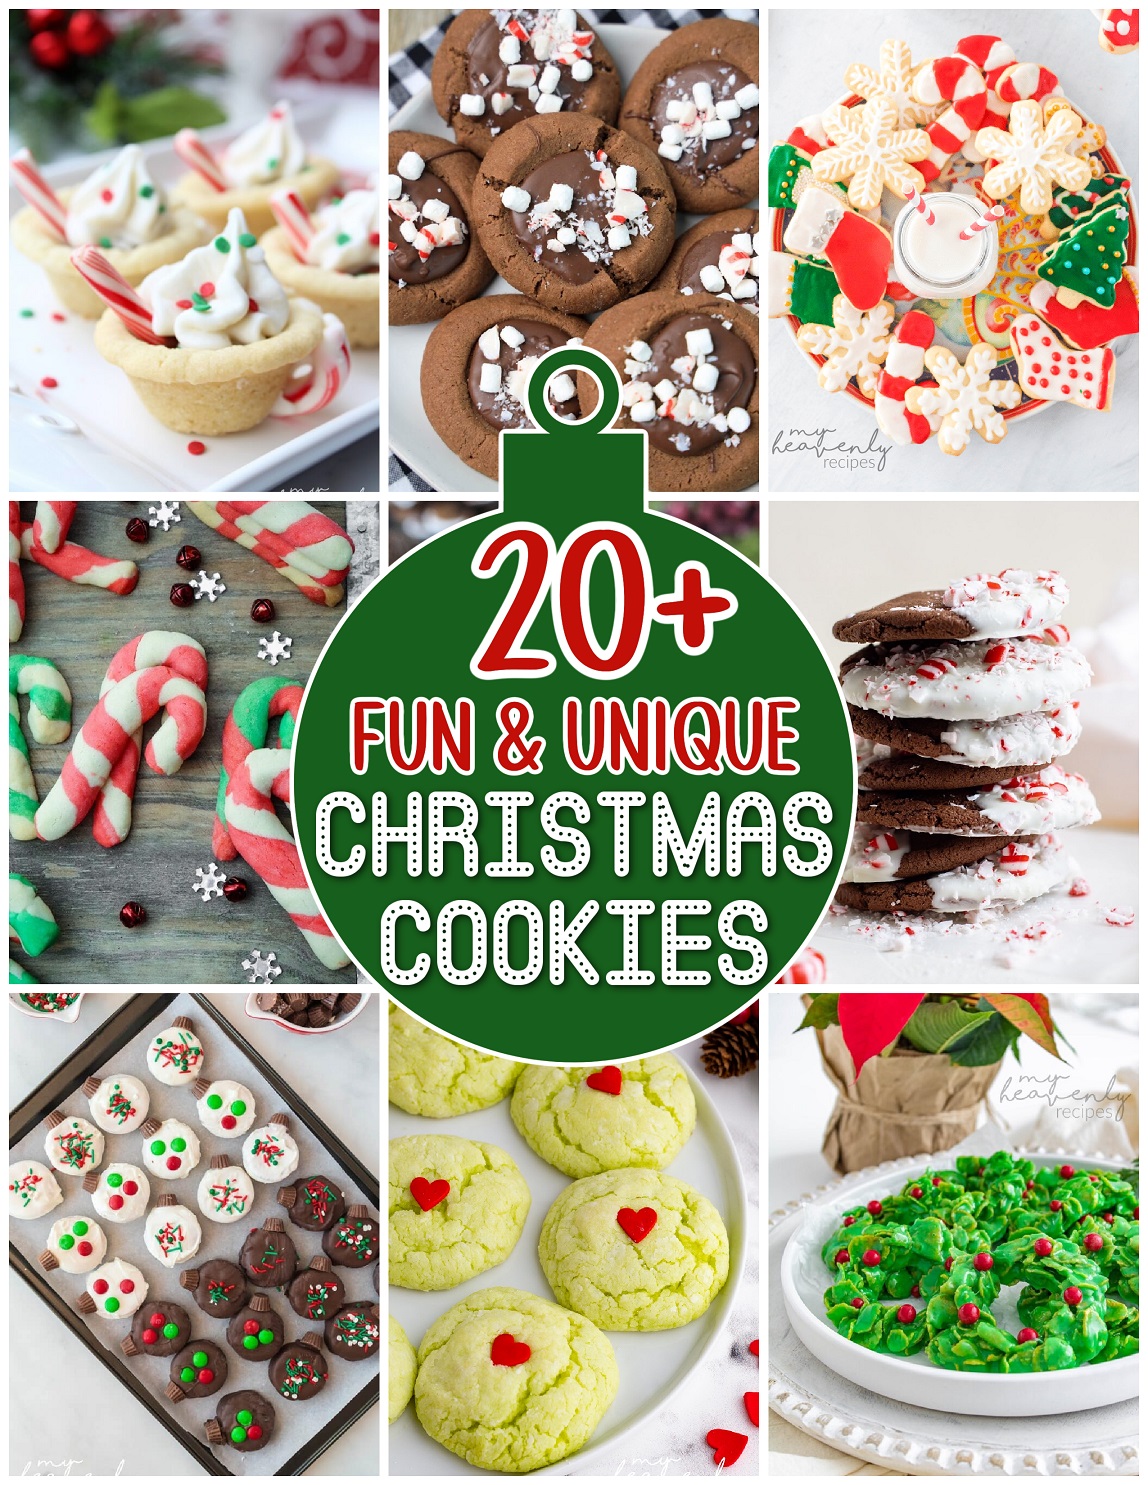 20+ Fun and Unique Christmas Cookies to Make